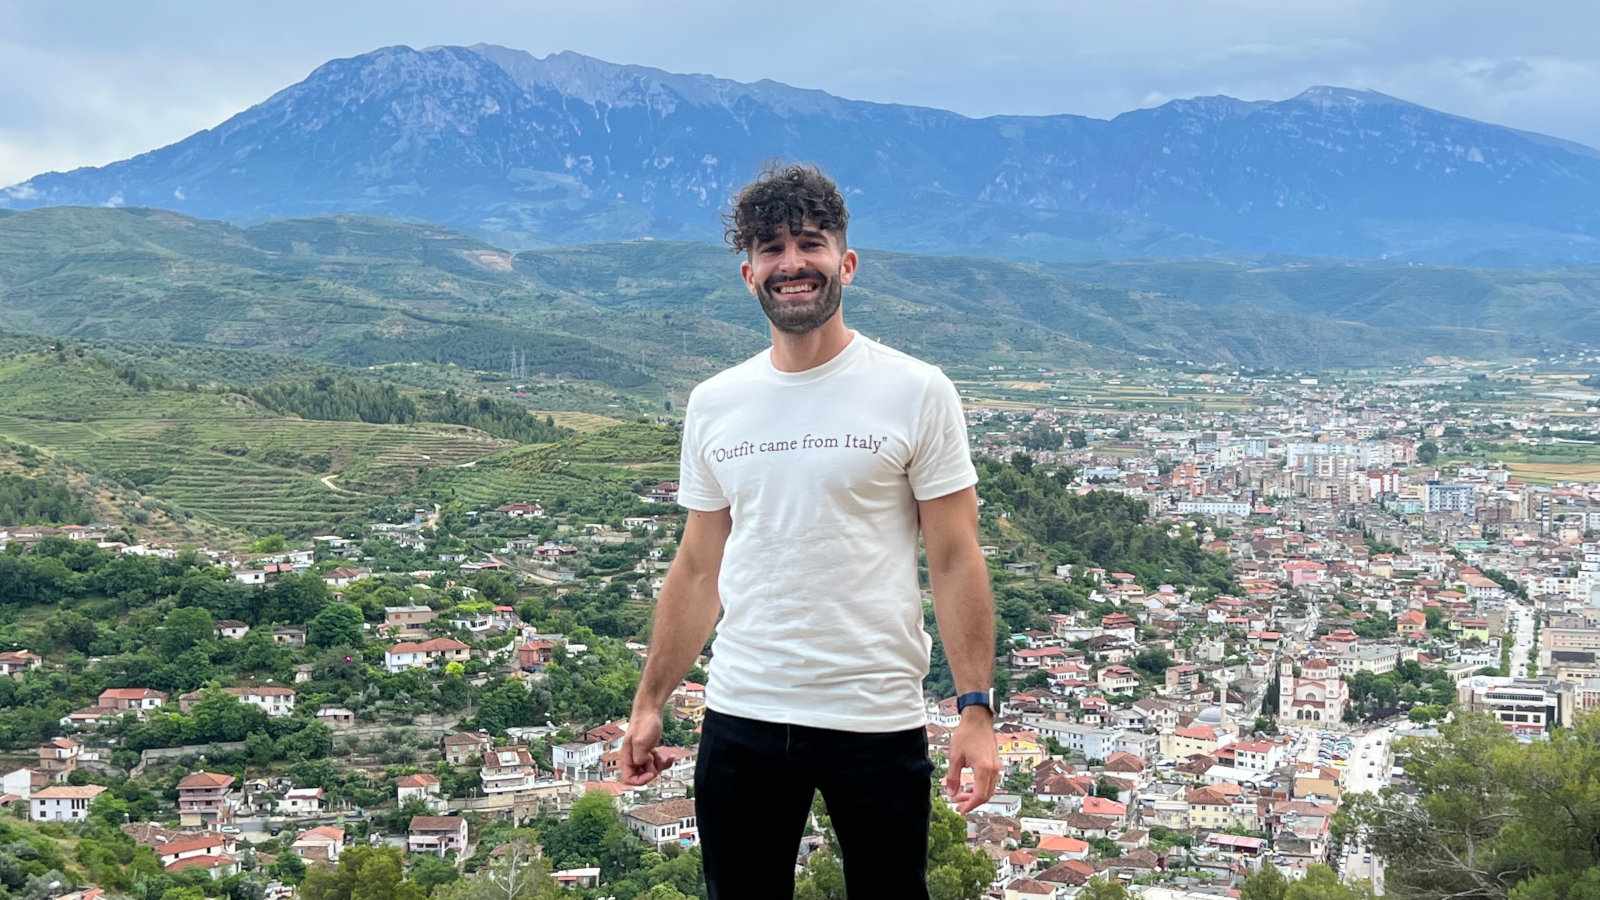 Stefan standing in front of a town and hills in the distance, wearing a white t-shirt that says "Outfit came from Italy."